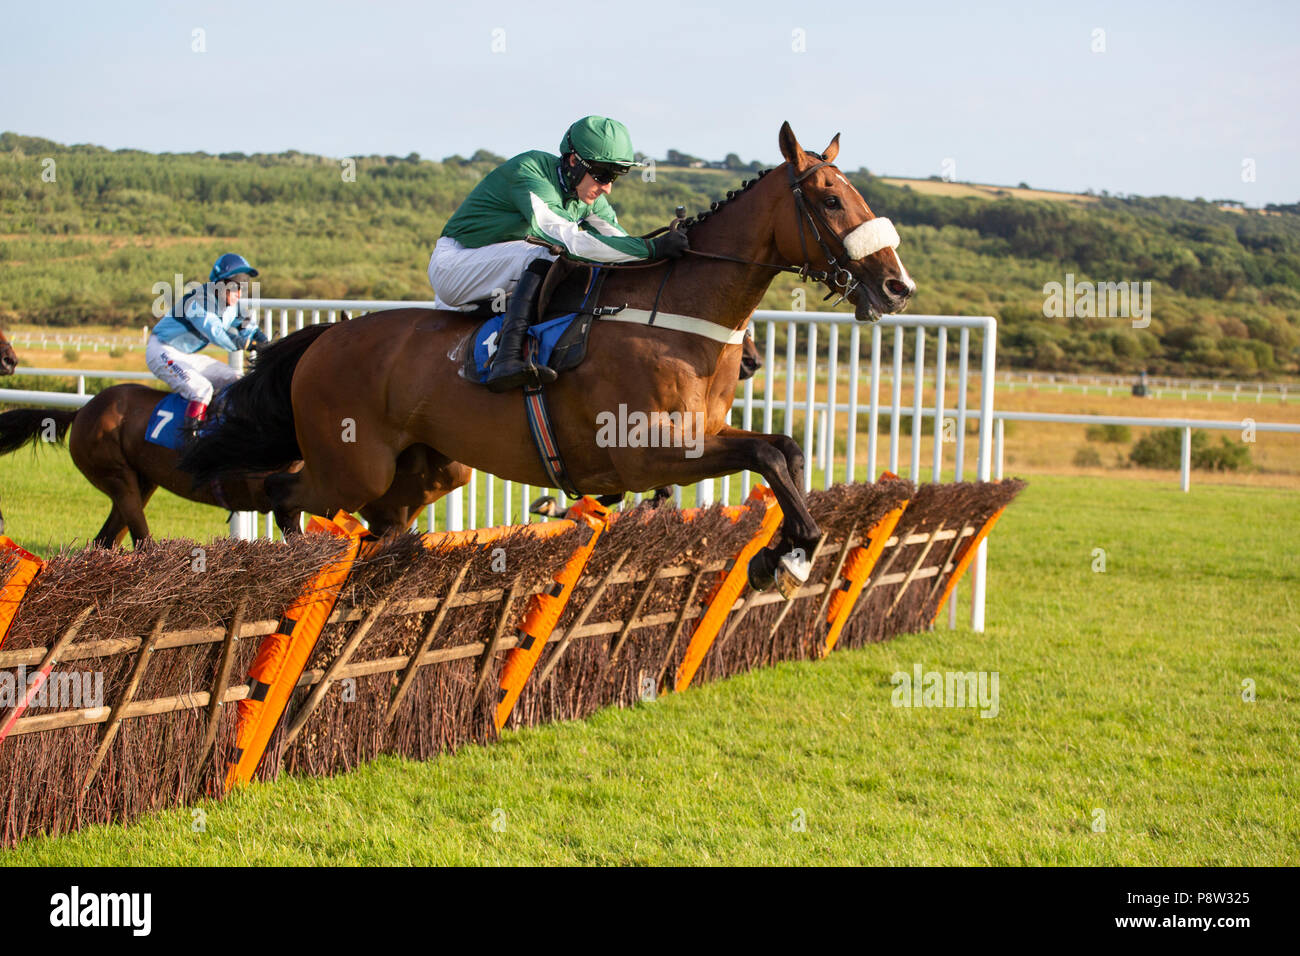 Court Royale (jockey Adam Wedge) jumps in a race at Ffos Las racecourse Stock Photo